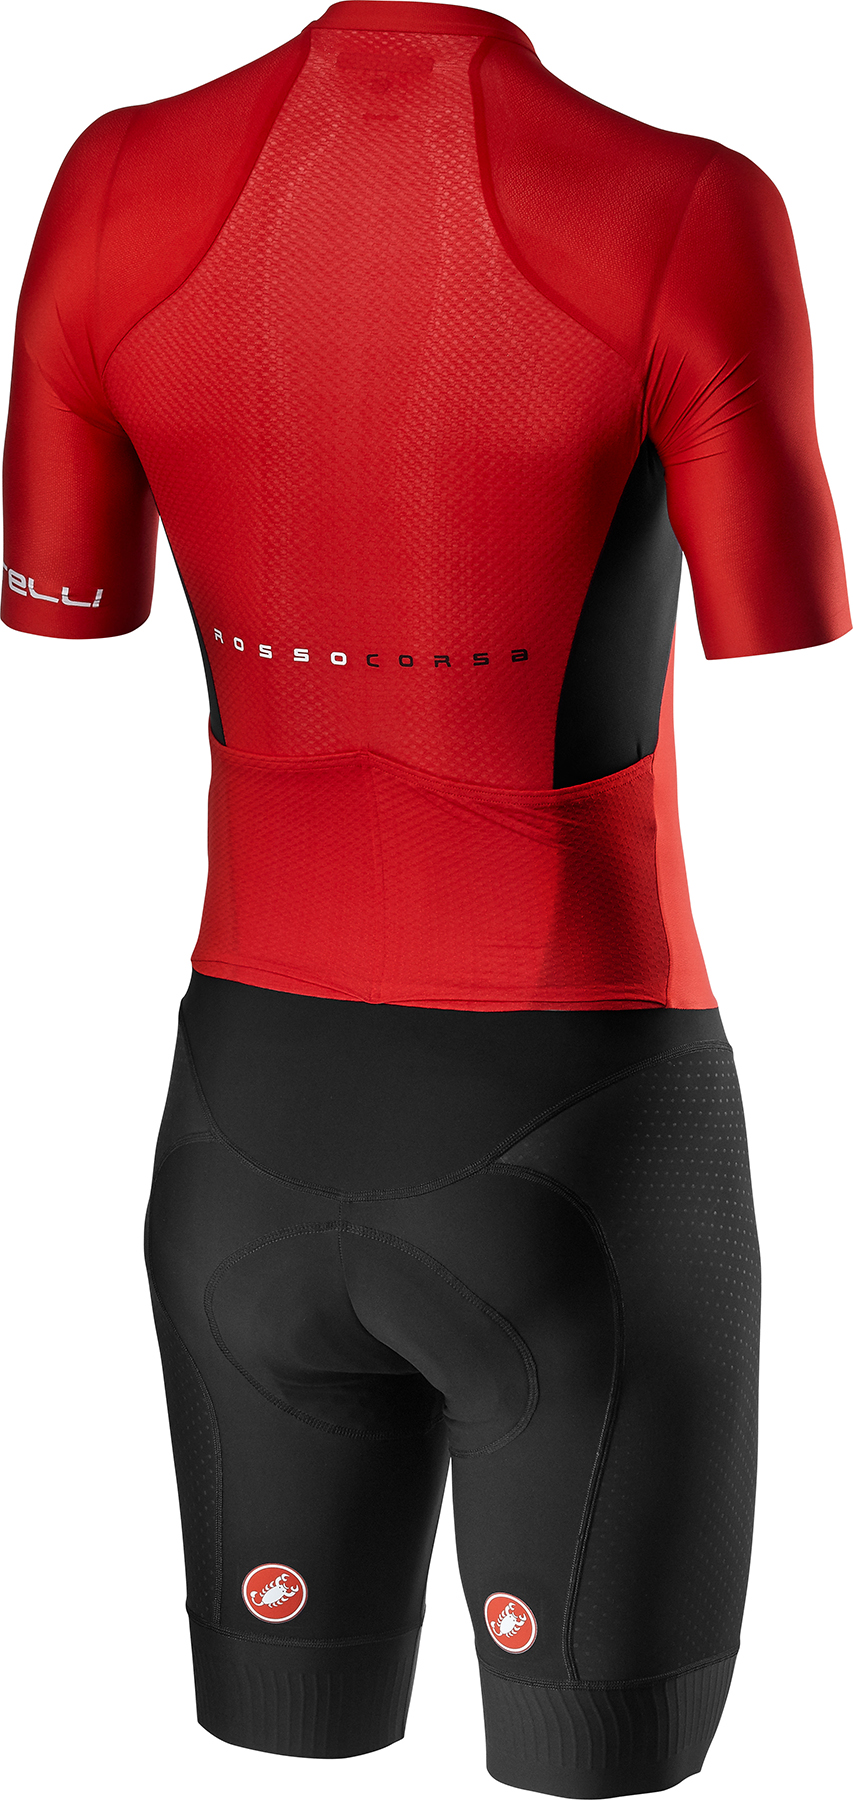 New arrivals Castelli Sanremo 4.1 Cycling Speed Suit At Lower